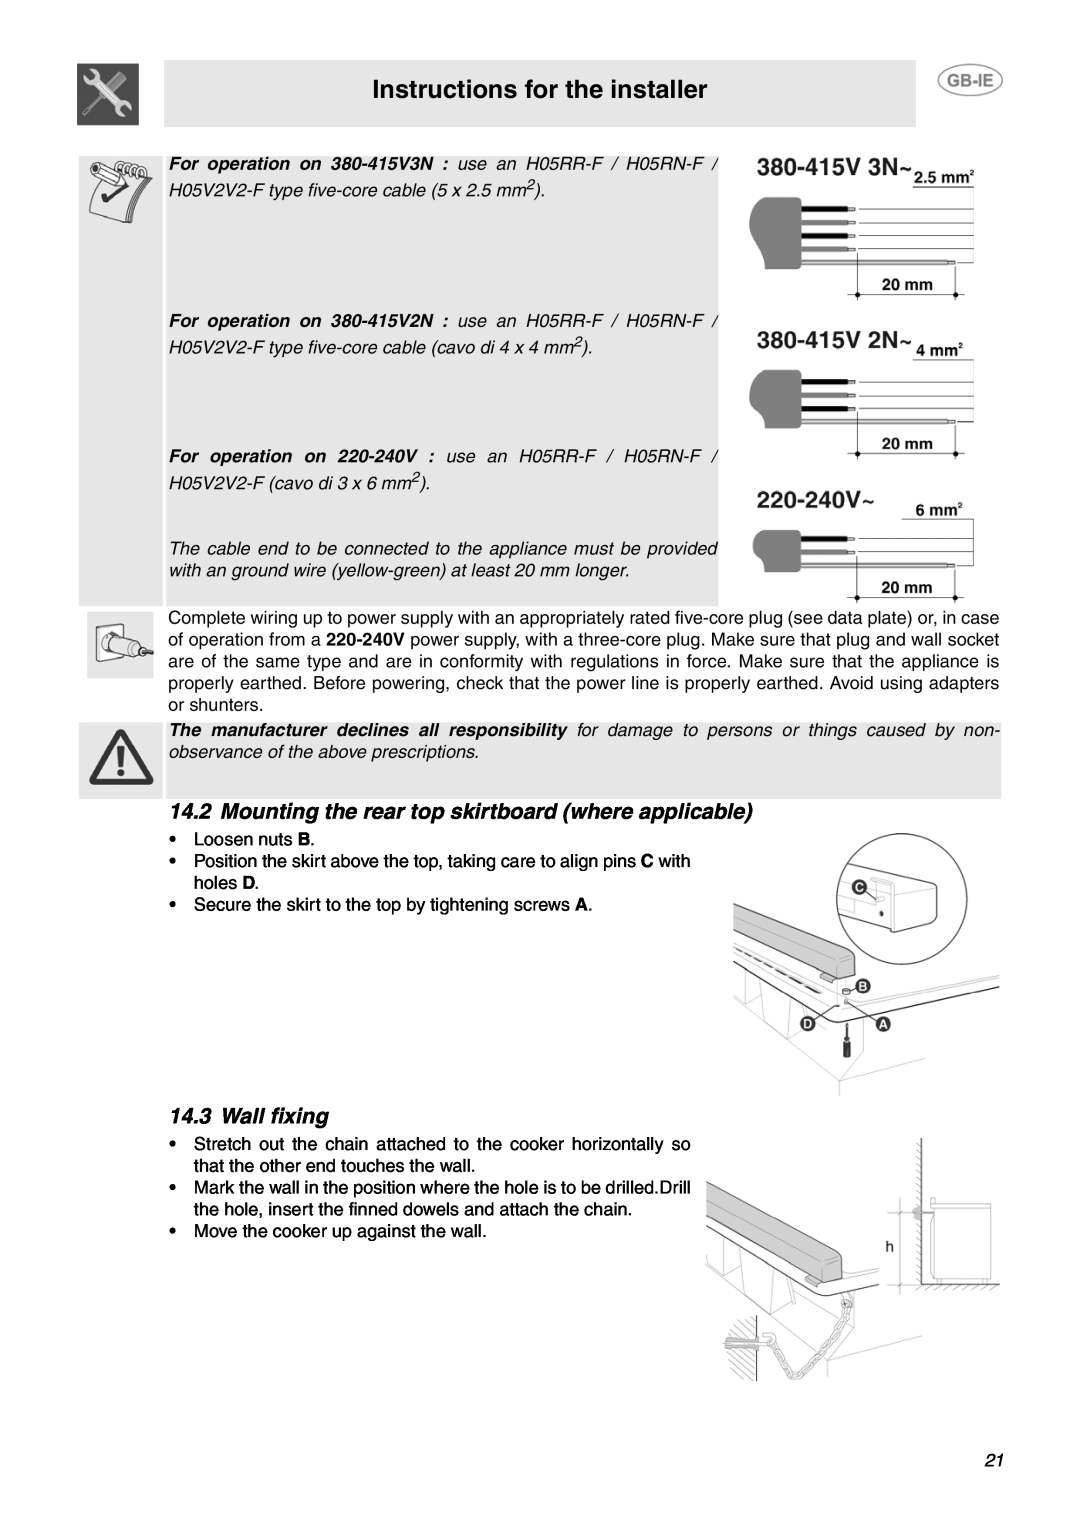 Smeg SUK61CPX5 manual Wall fixing, Instructions for the installer 